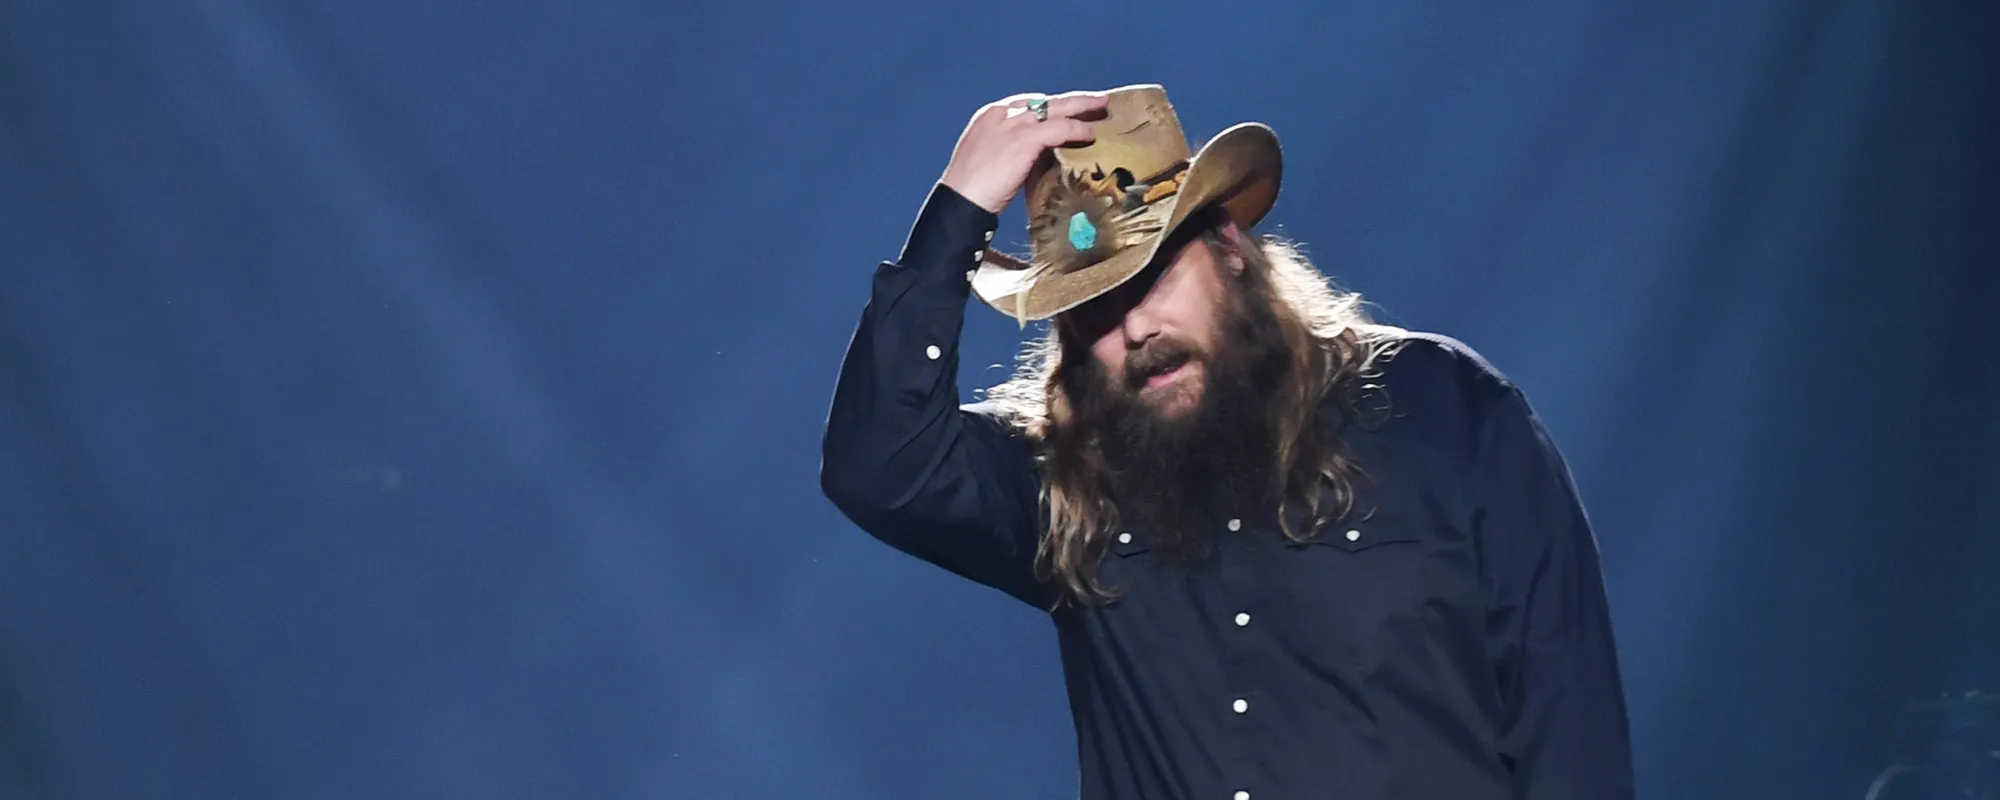 WATCH: Chris Stapleton Pays Tribute to Fellow SteelDriver Mike Henderson with Encore Performance of “Where Rainbows Never Die”